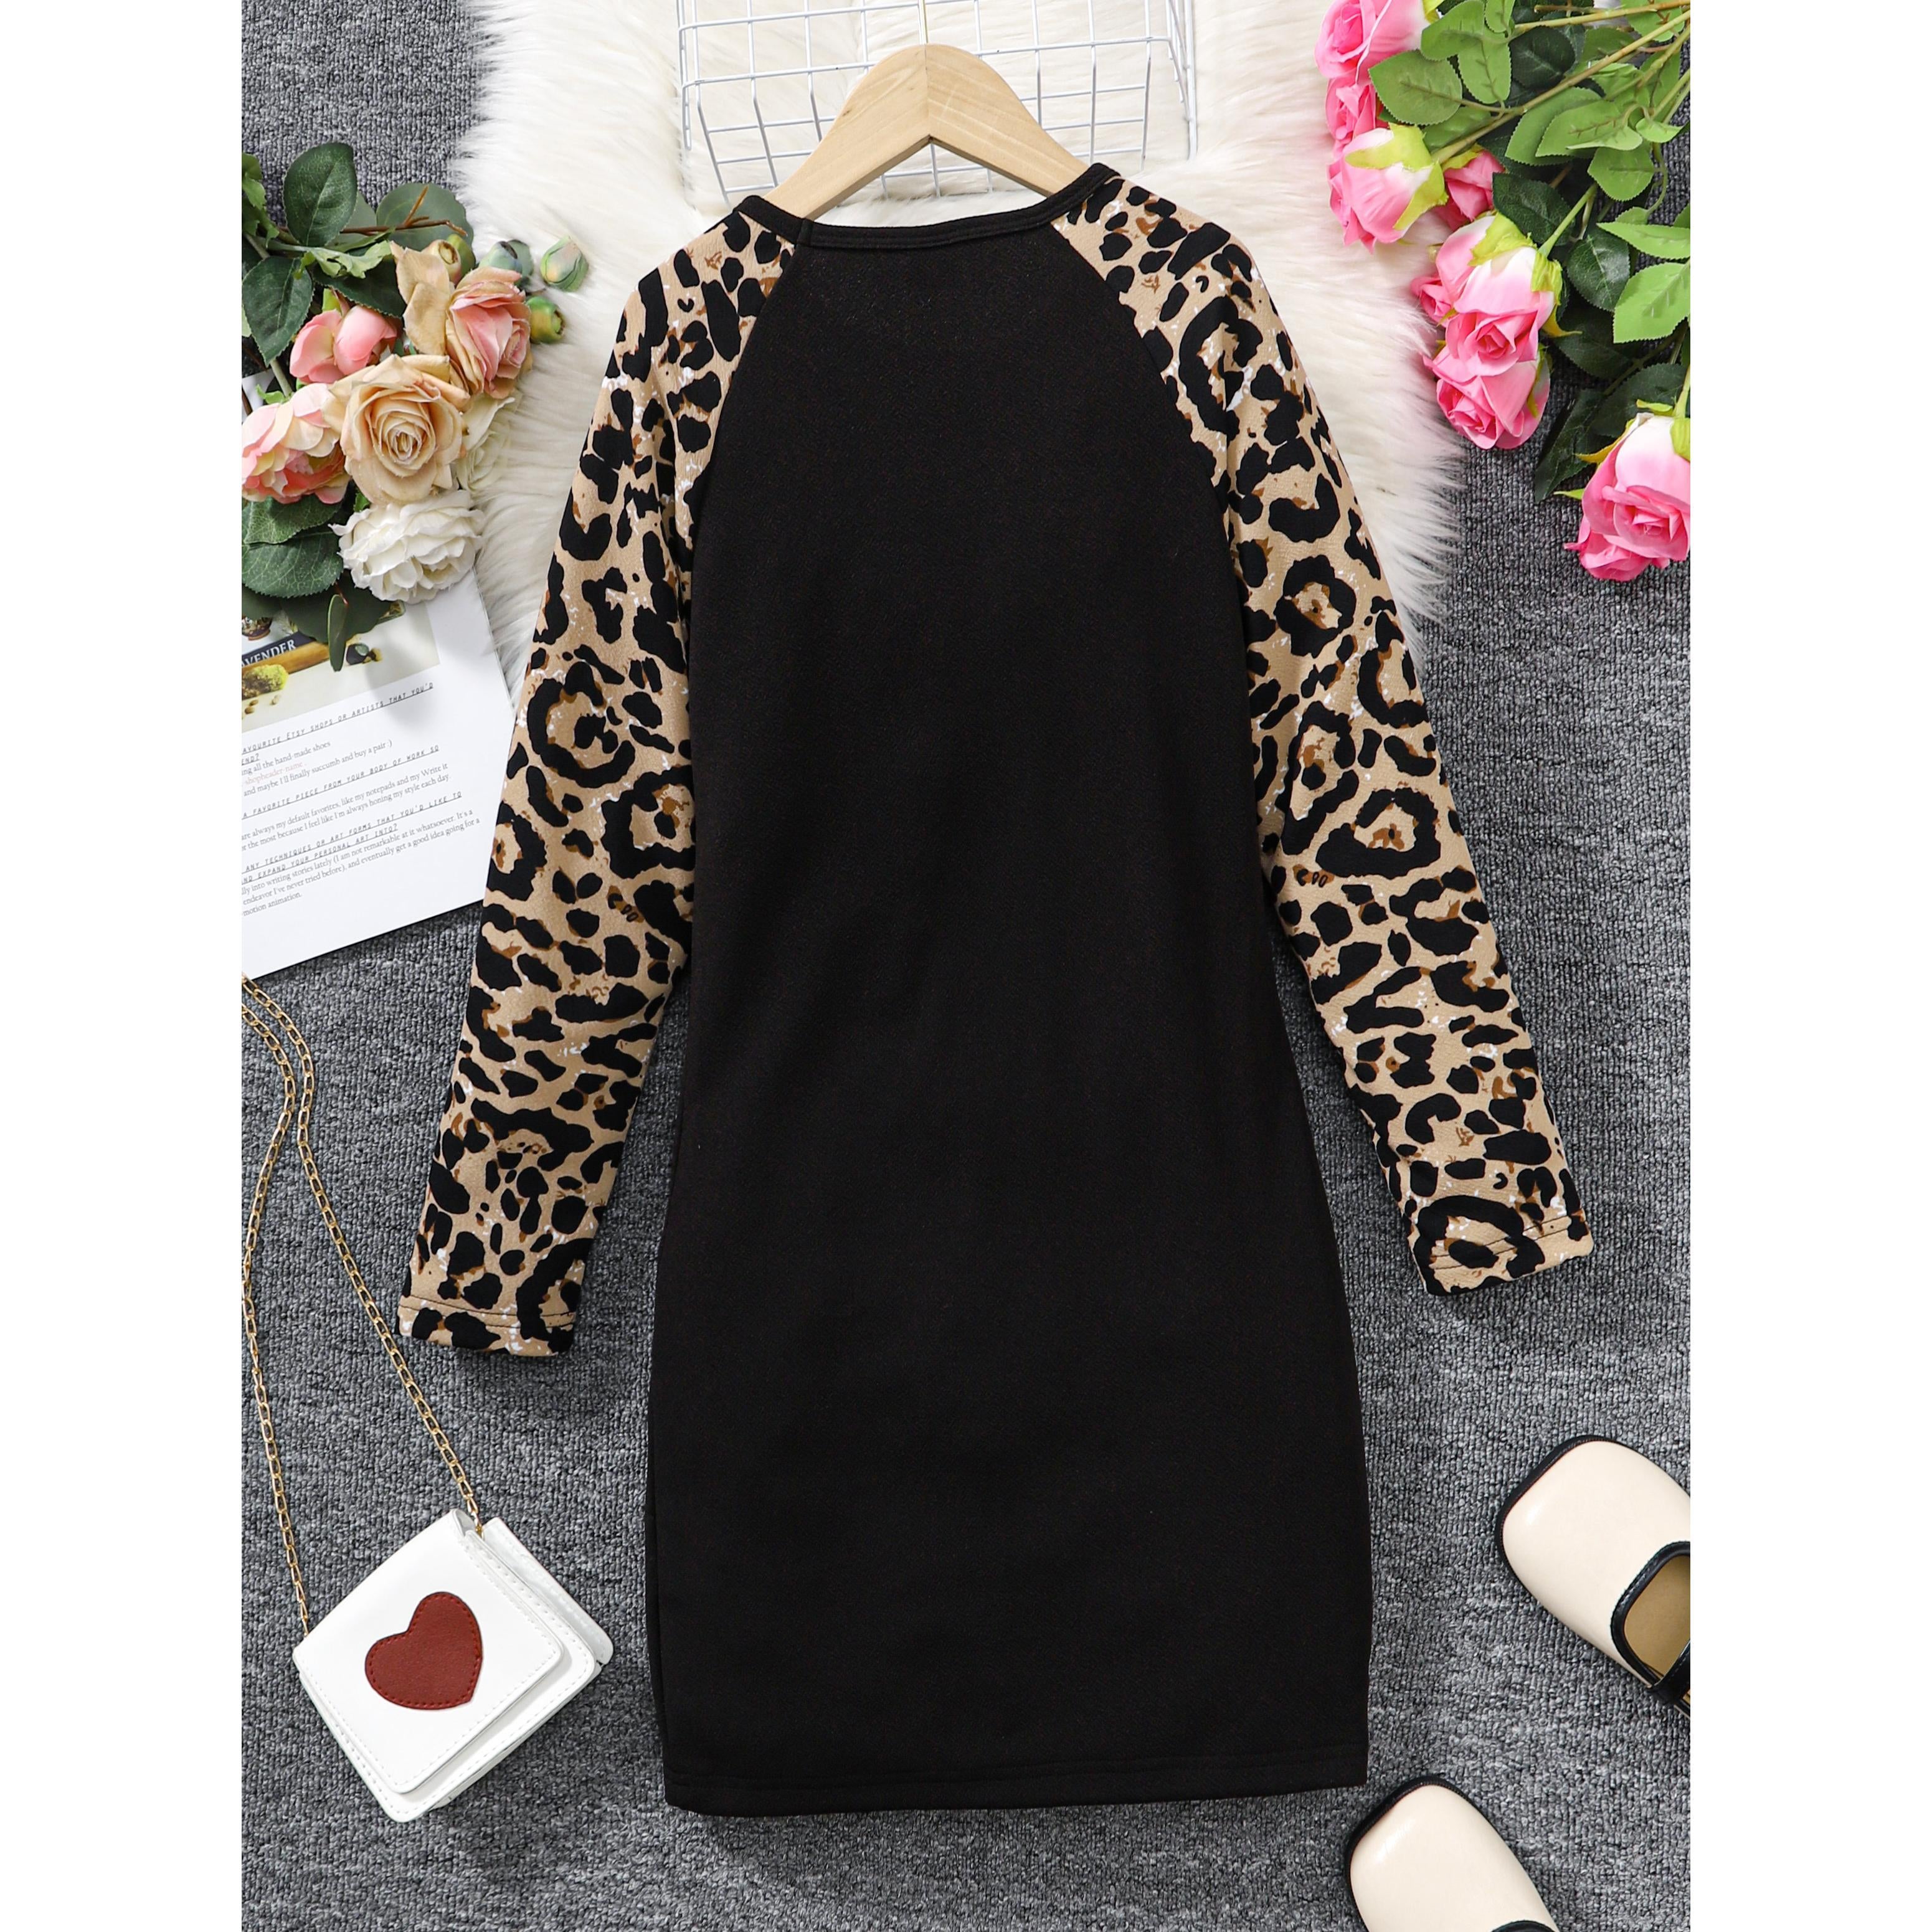 8-14Y Ready Stock Big Girls Dress Long Sleeves Color Block Leopard Splicing Dress For Party Kids Fall Winter Clothes Black Catpapa 462307028